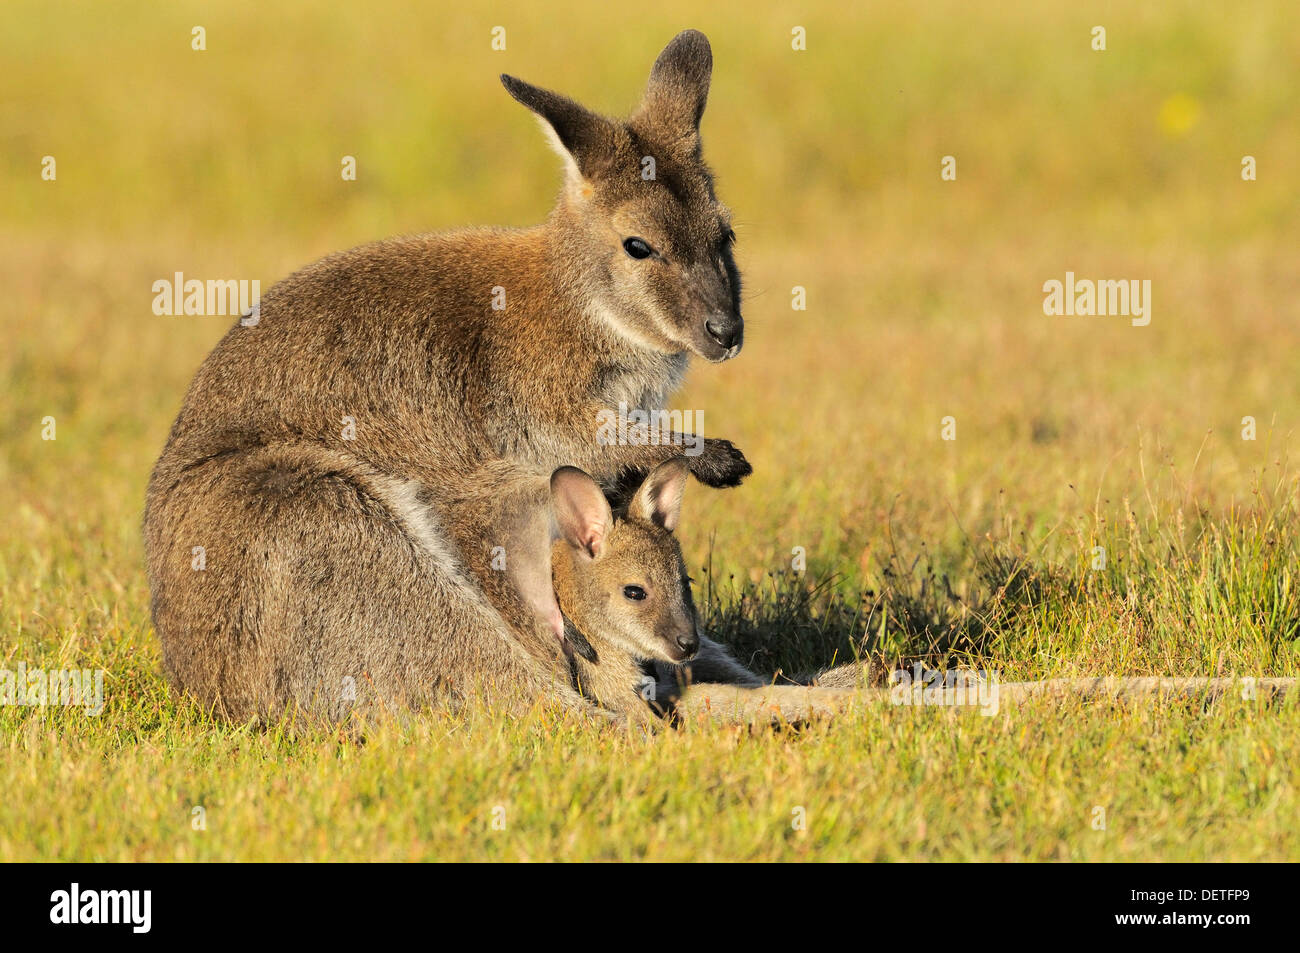 Bennett's Wallaby Macropus rufogriseus Mother with joey in pouch Photographed in Tasmania, Australia Stock Photo